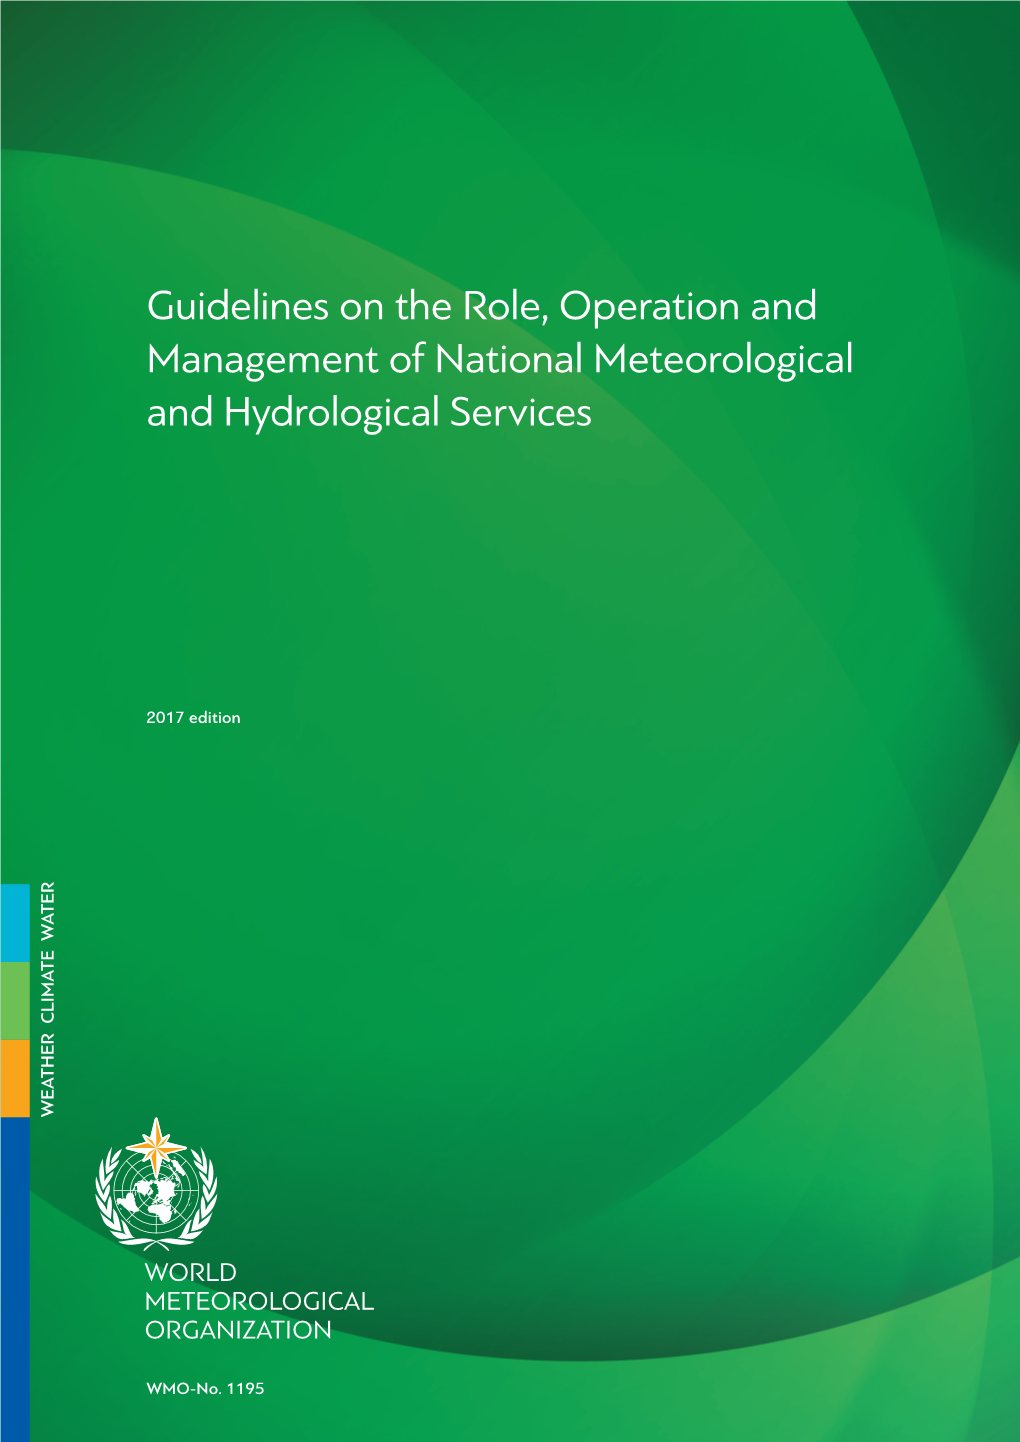 Guidelines on the Role, Operation and Management of National Meteorological and Hydrological Services